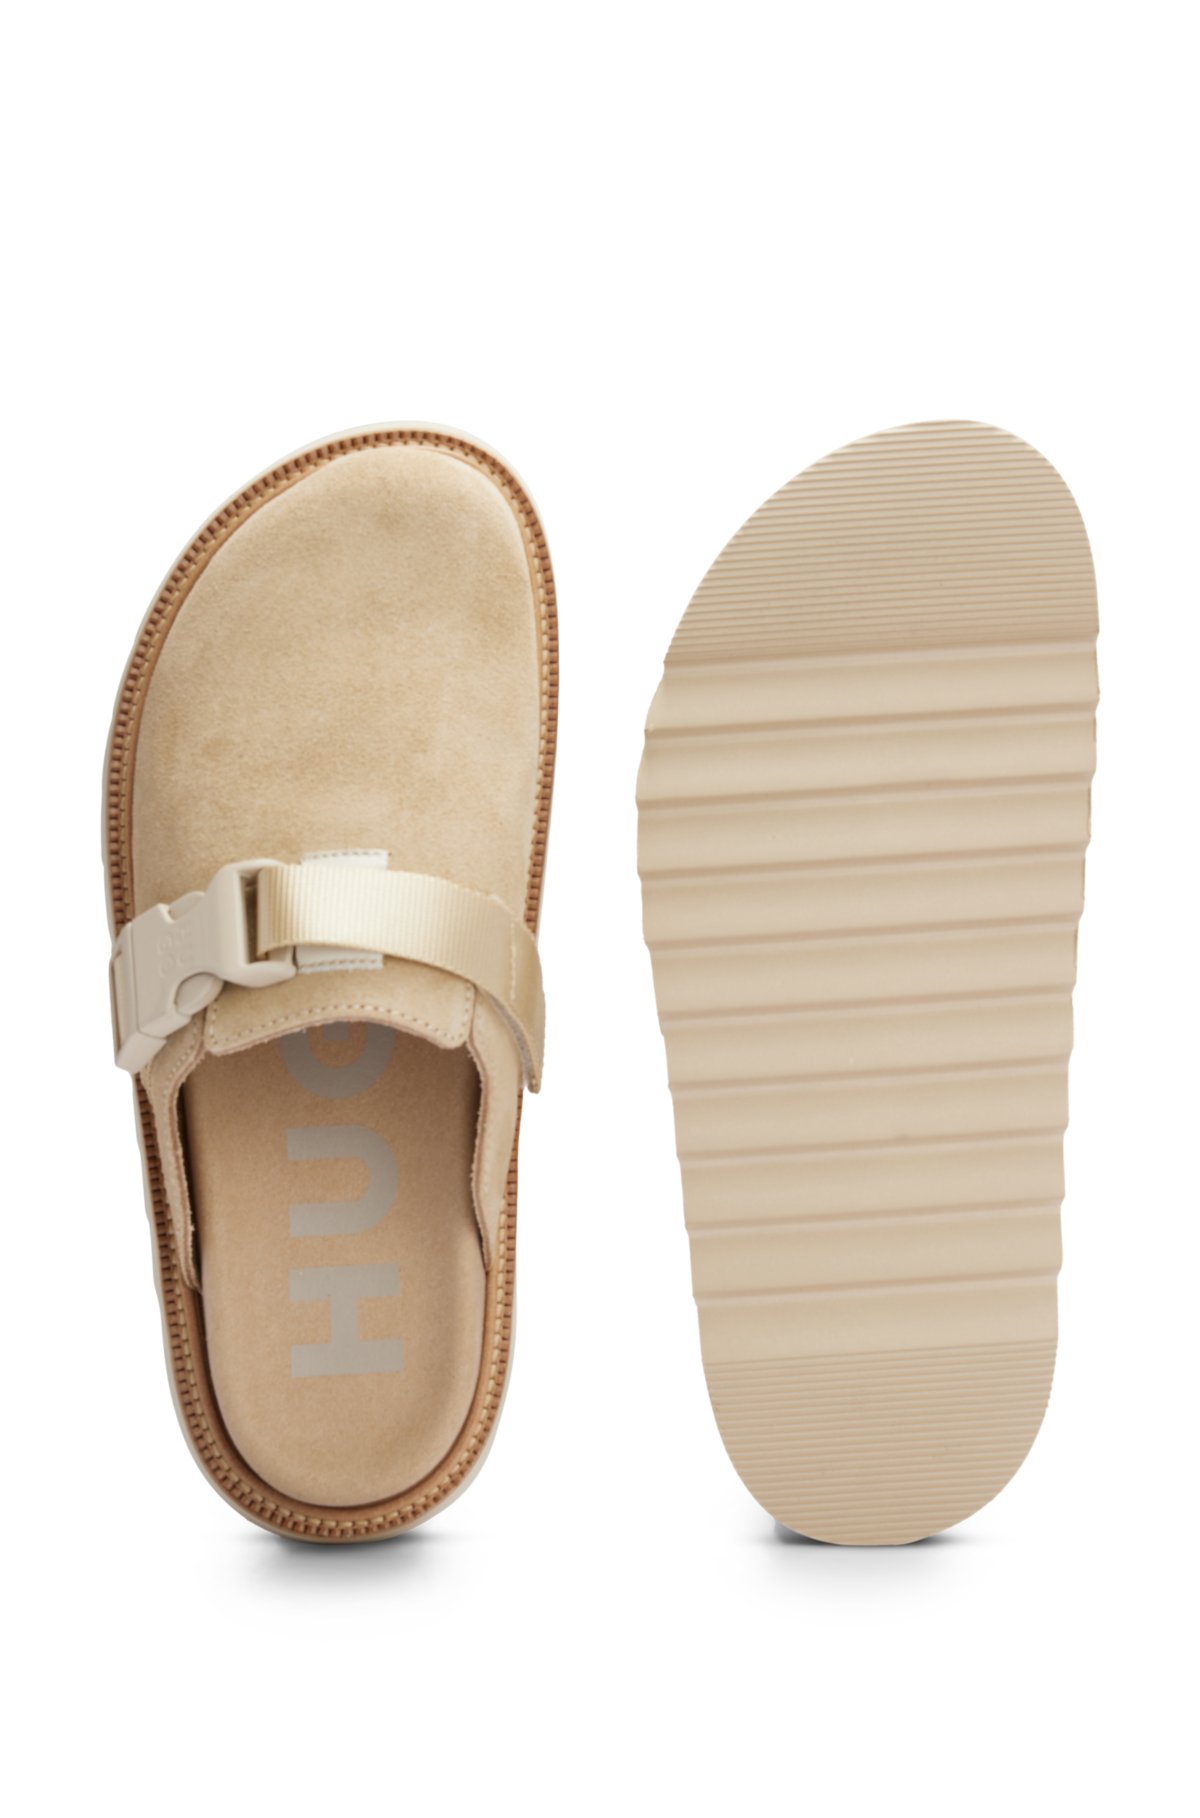 Suede slip-on shoes with buckled strap, Light Beige